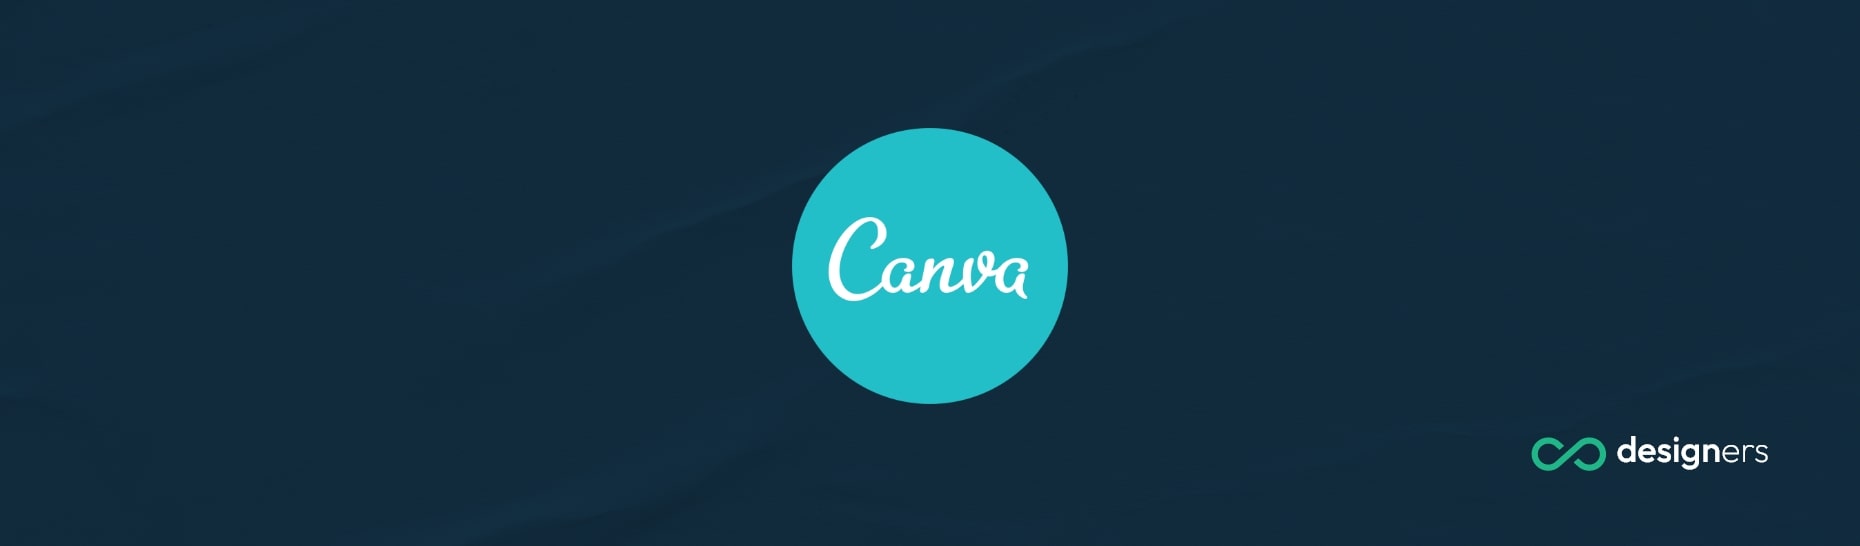 What Color Is Rose Gold on Canva?